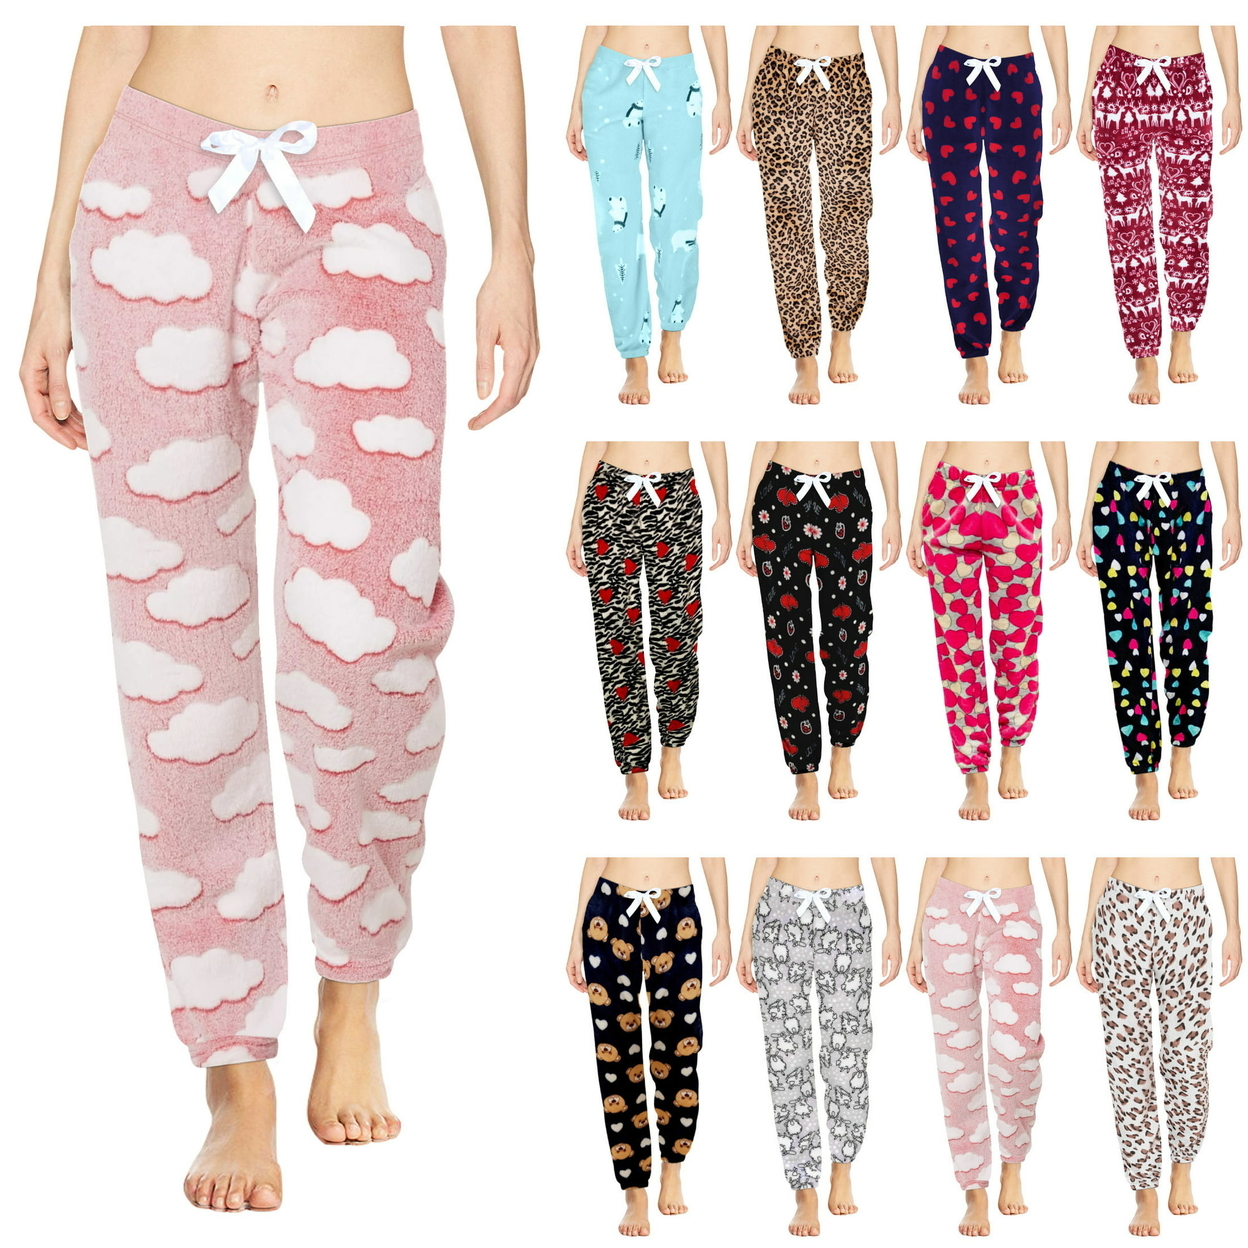 3-Pack: Women's Solid & Printed Ultra-Soft Comfy Stretch Micro-Fleece Pajama Lounge Pants - Xx-large, Shapes